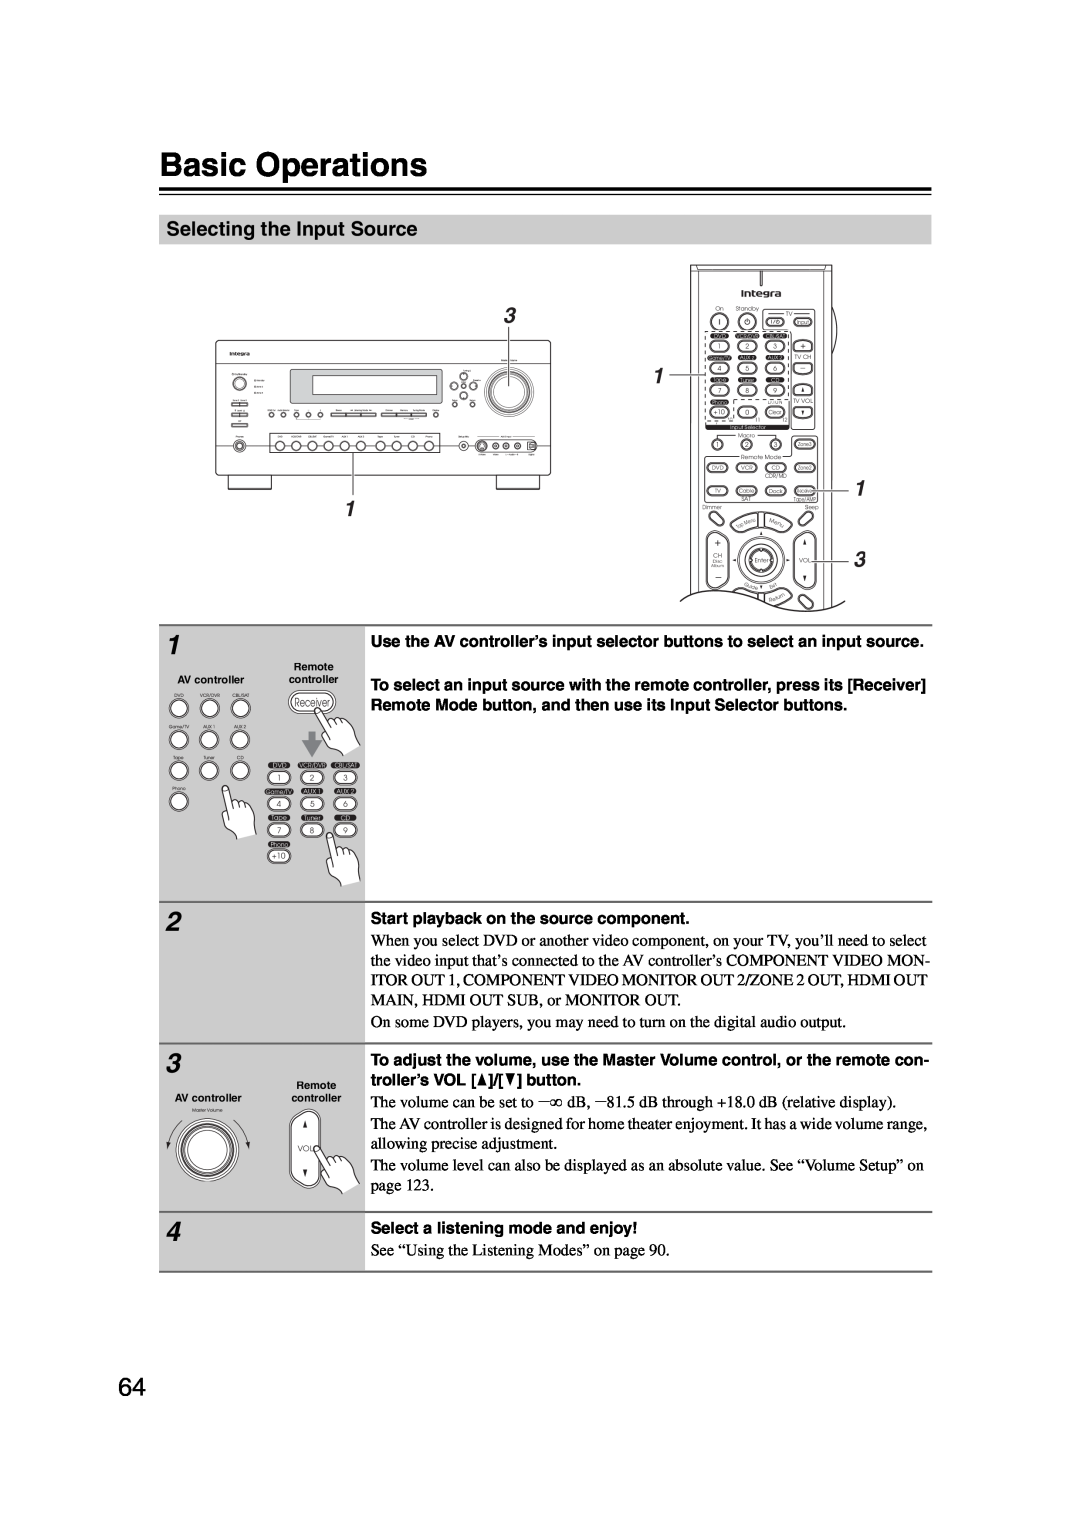 Integra DHC-9.9 instruction manual Basic Operations, Selecting the Input Source 